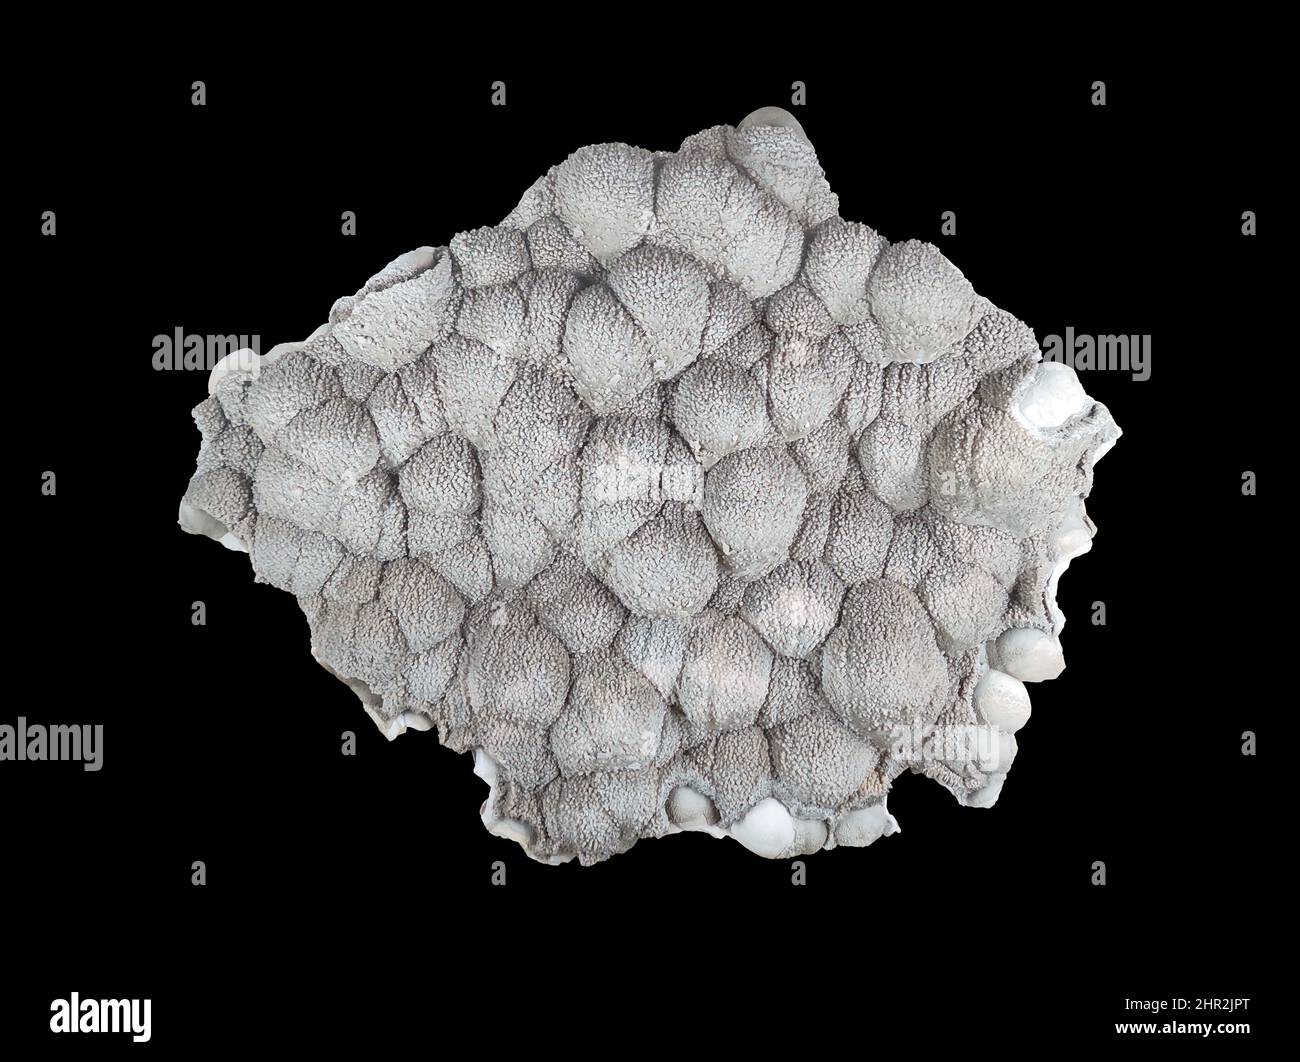 Calcite carbonate mineral stone over black background Stock Photo